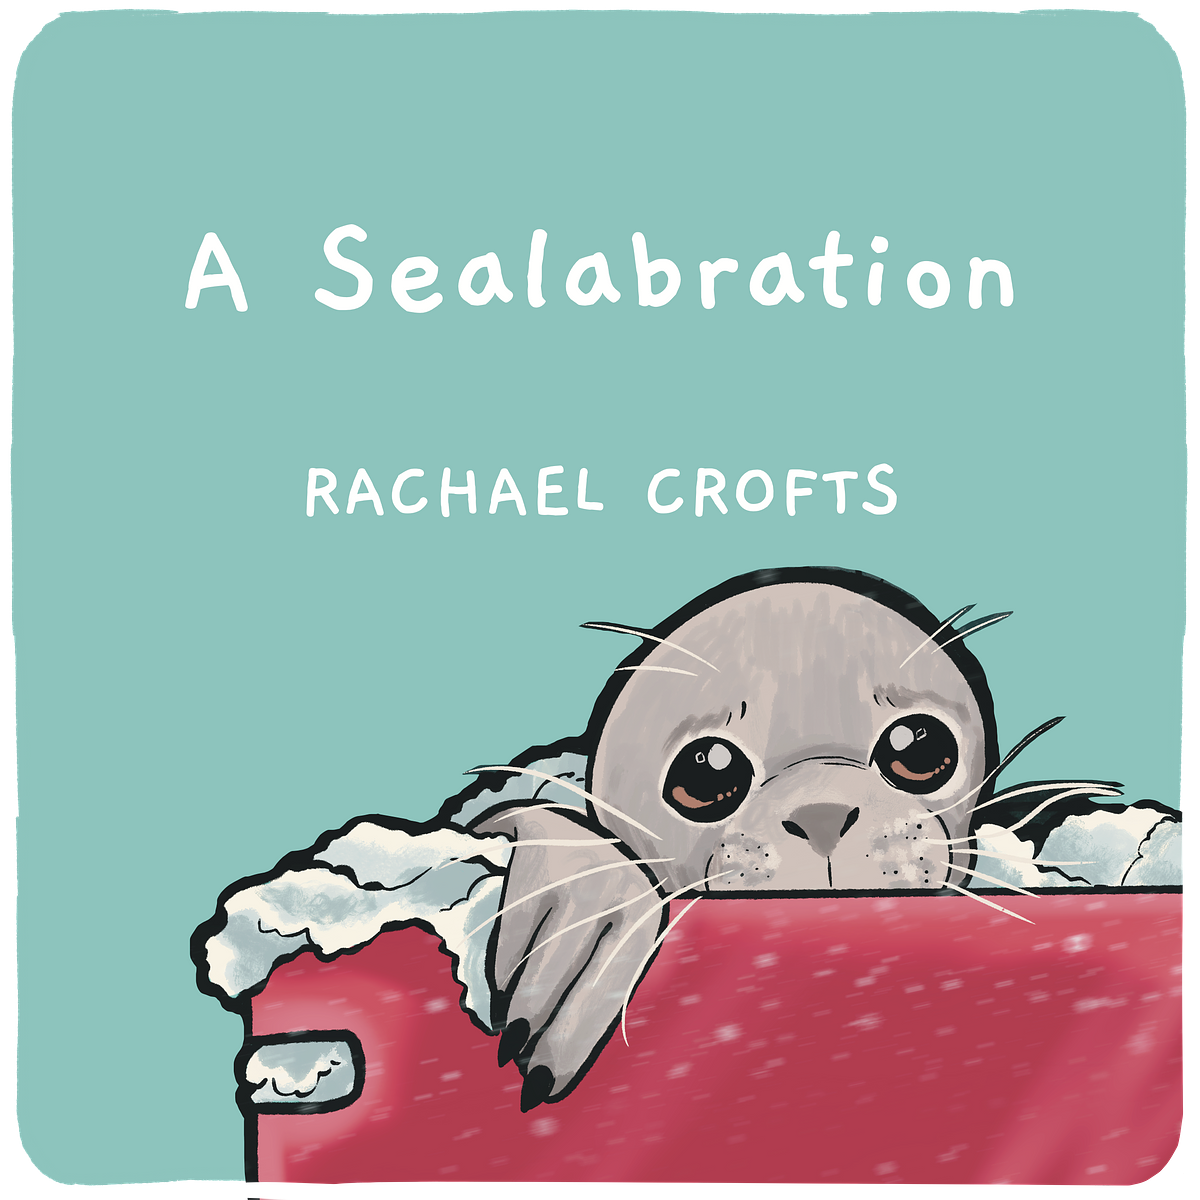 baby seal in red box on blue backgound with text that says 'A Sealabration, Rachael Crofts'